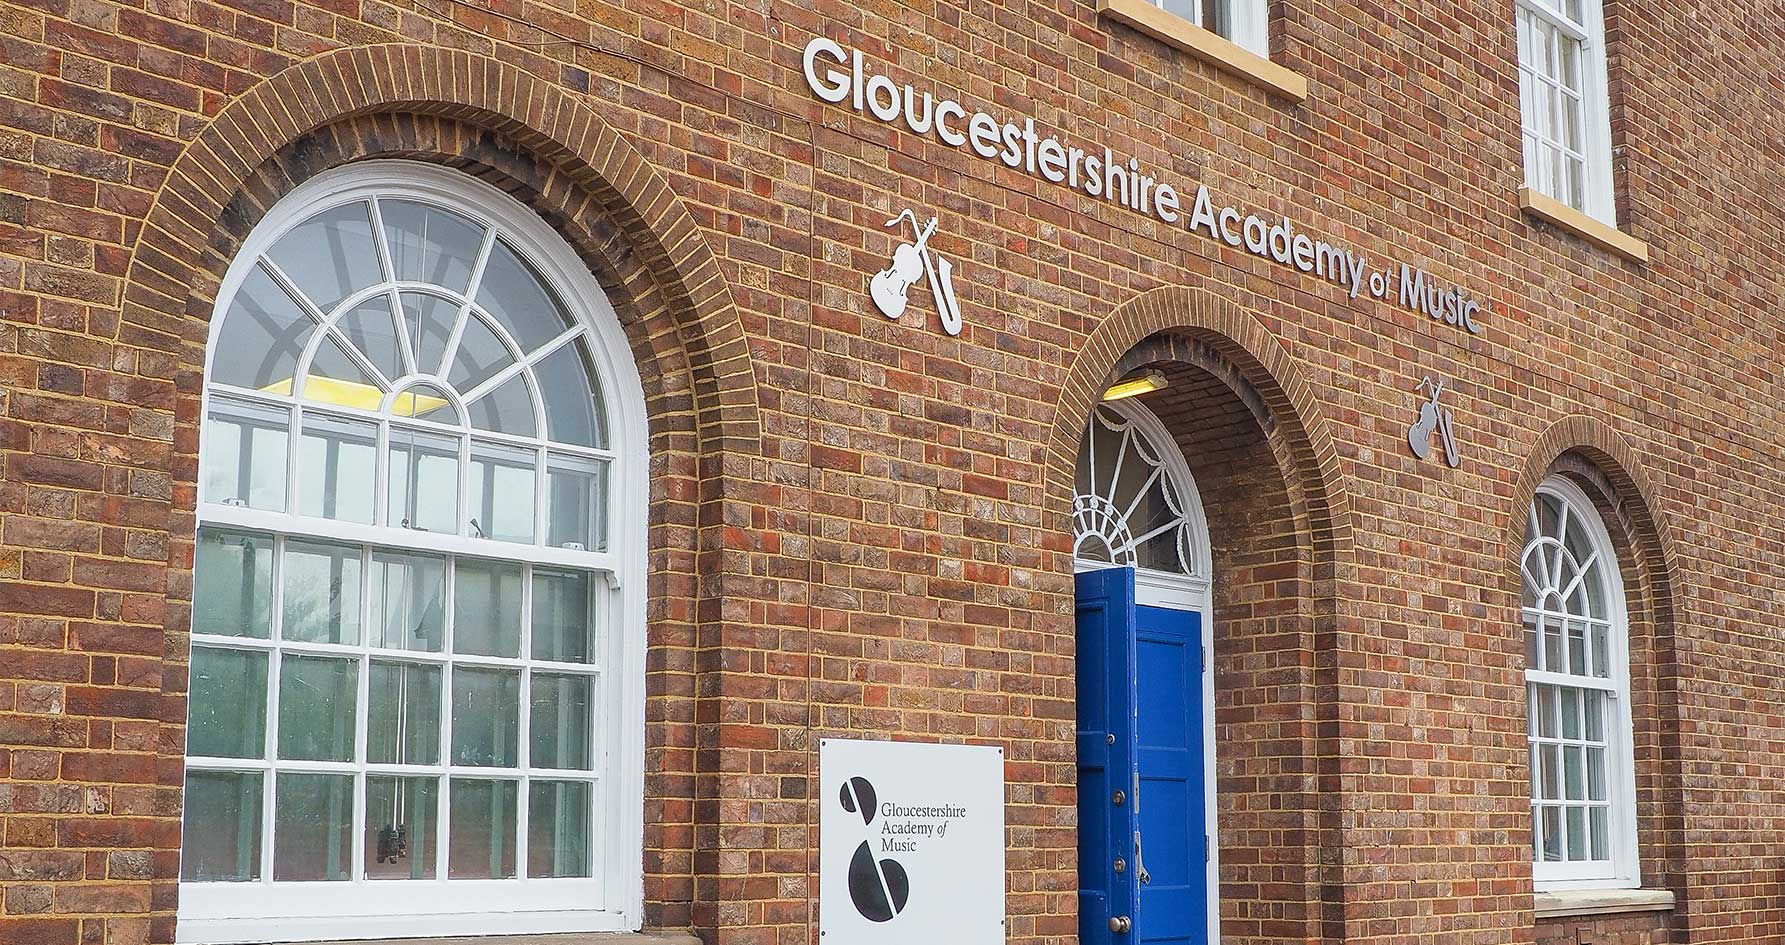 Gloucester Academy of Music, Barbican House branch